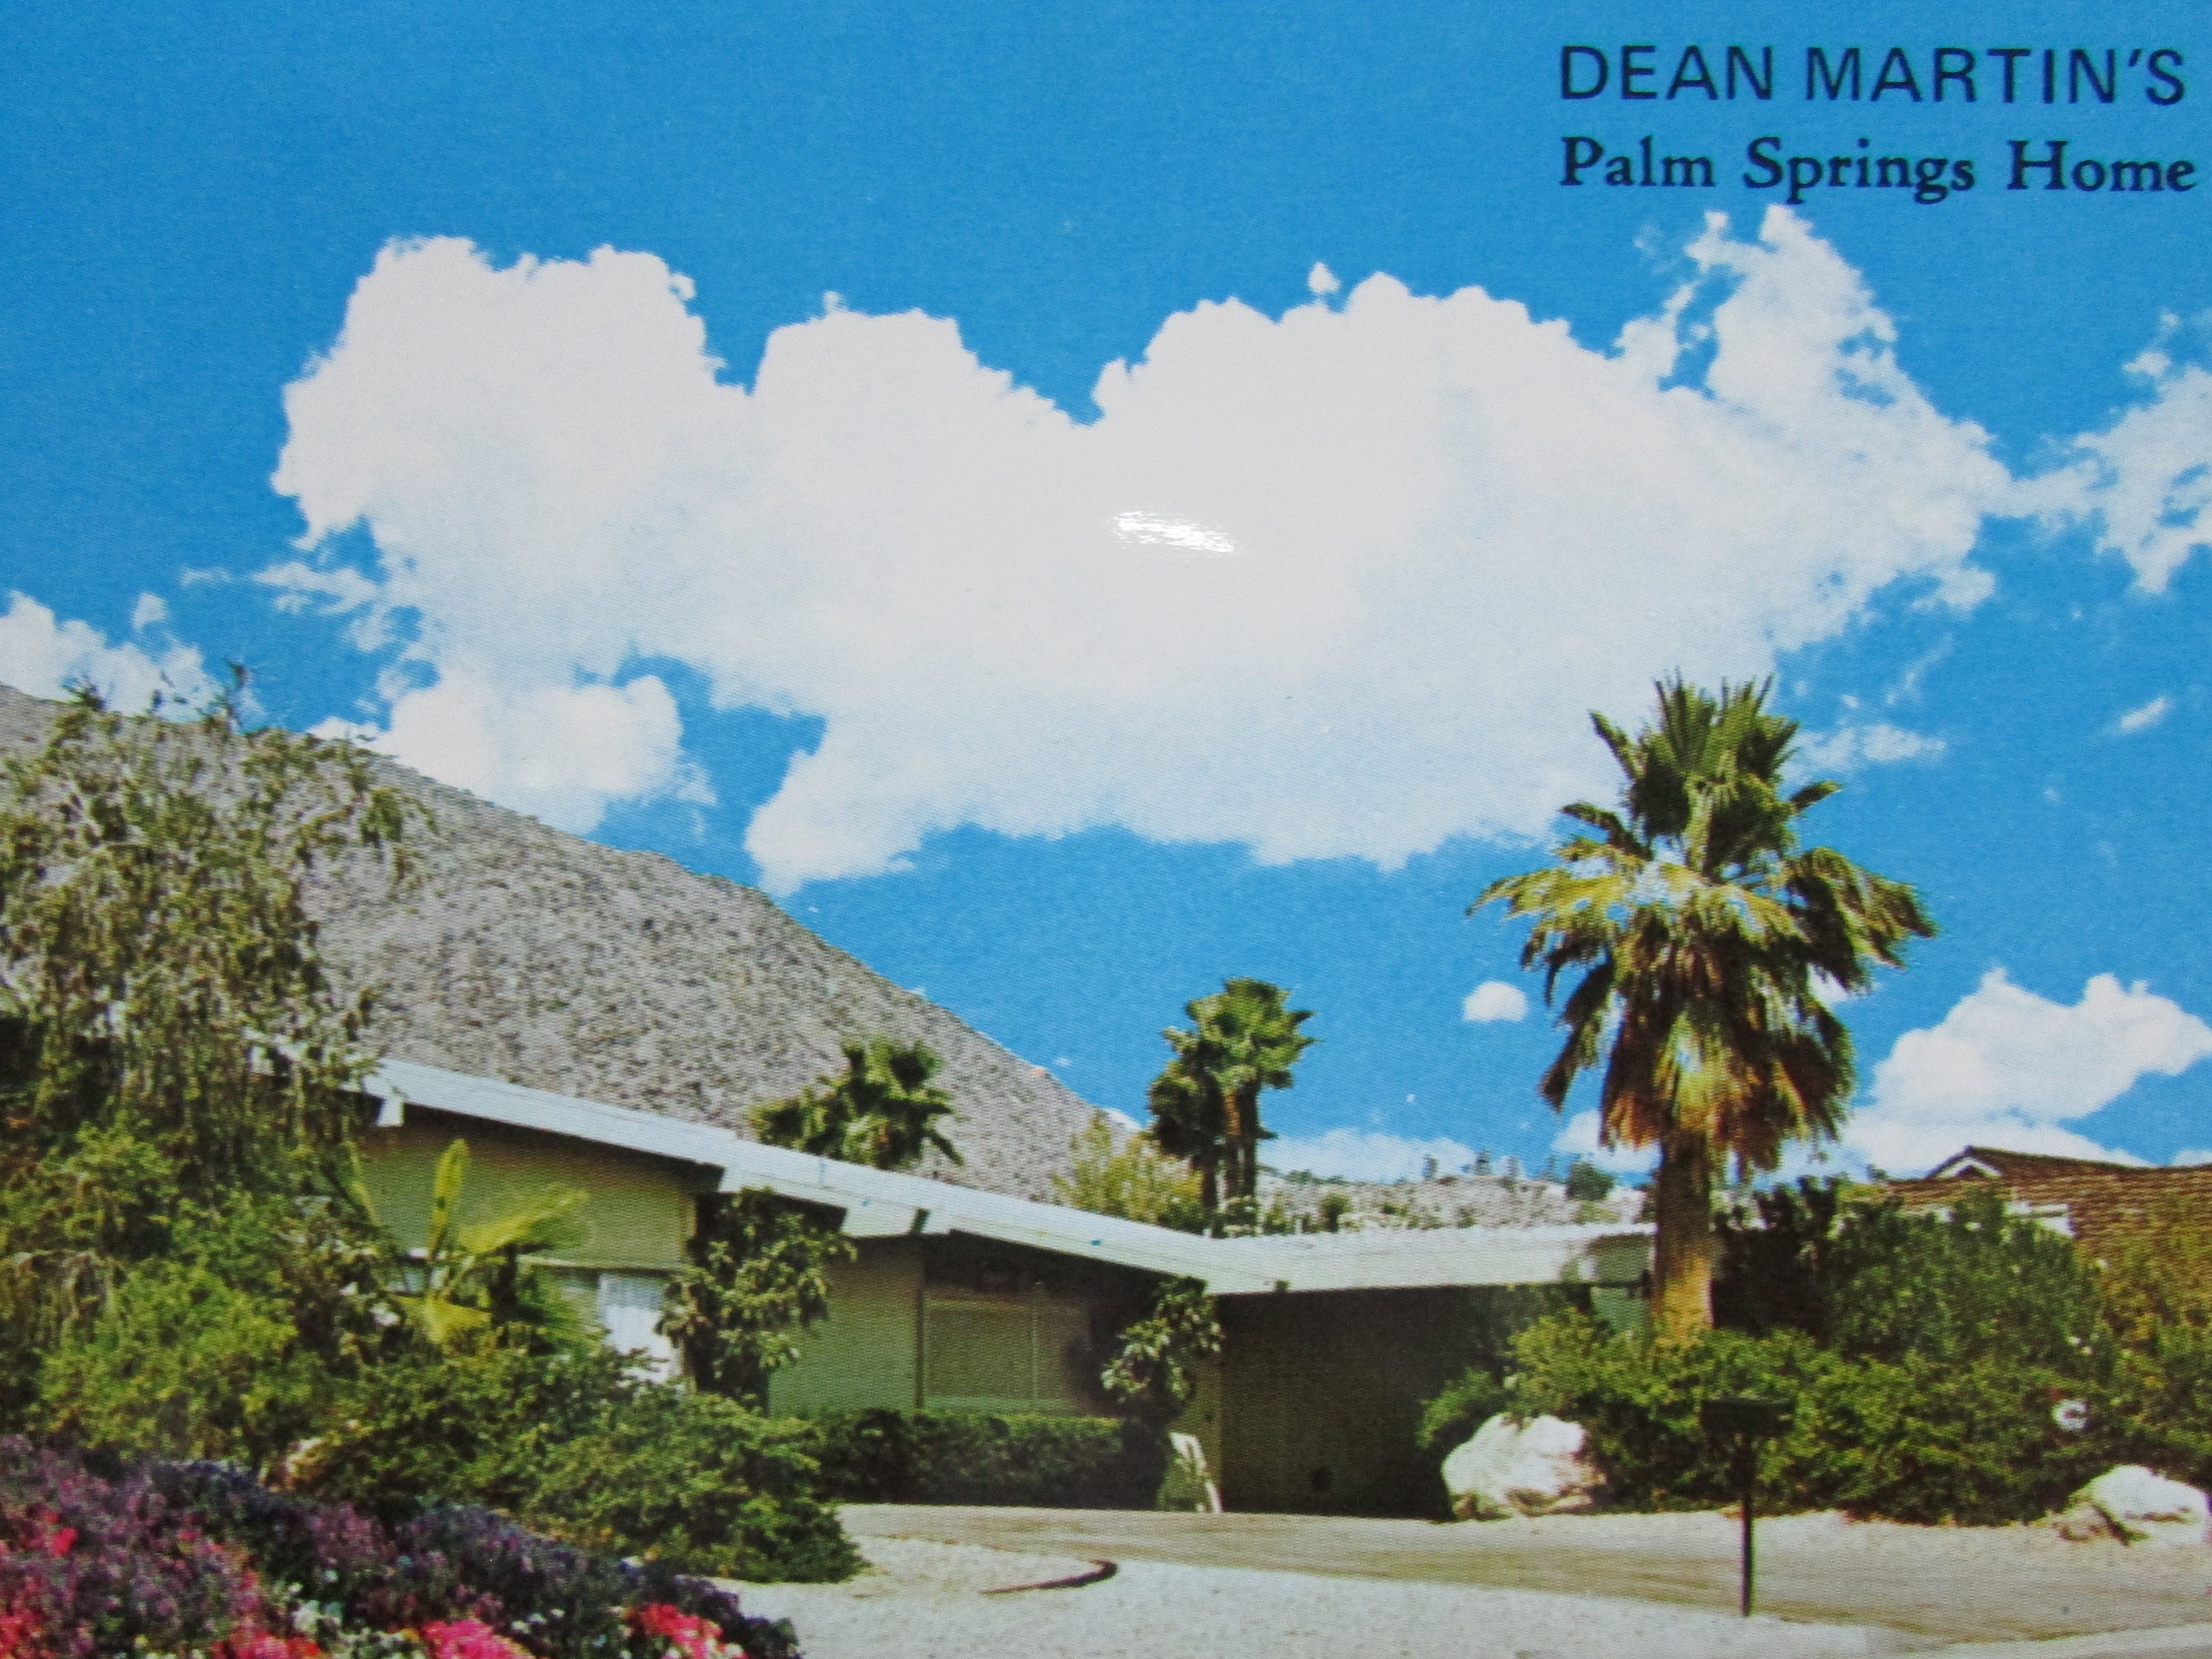 Dean martin's abandoned palm springs home